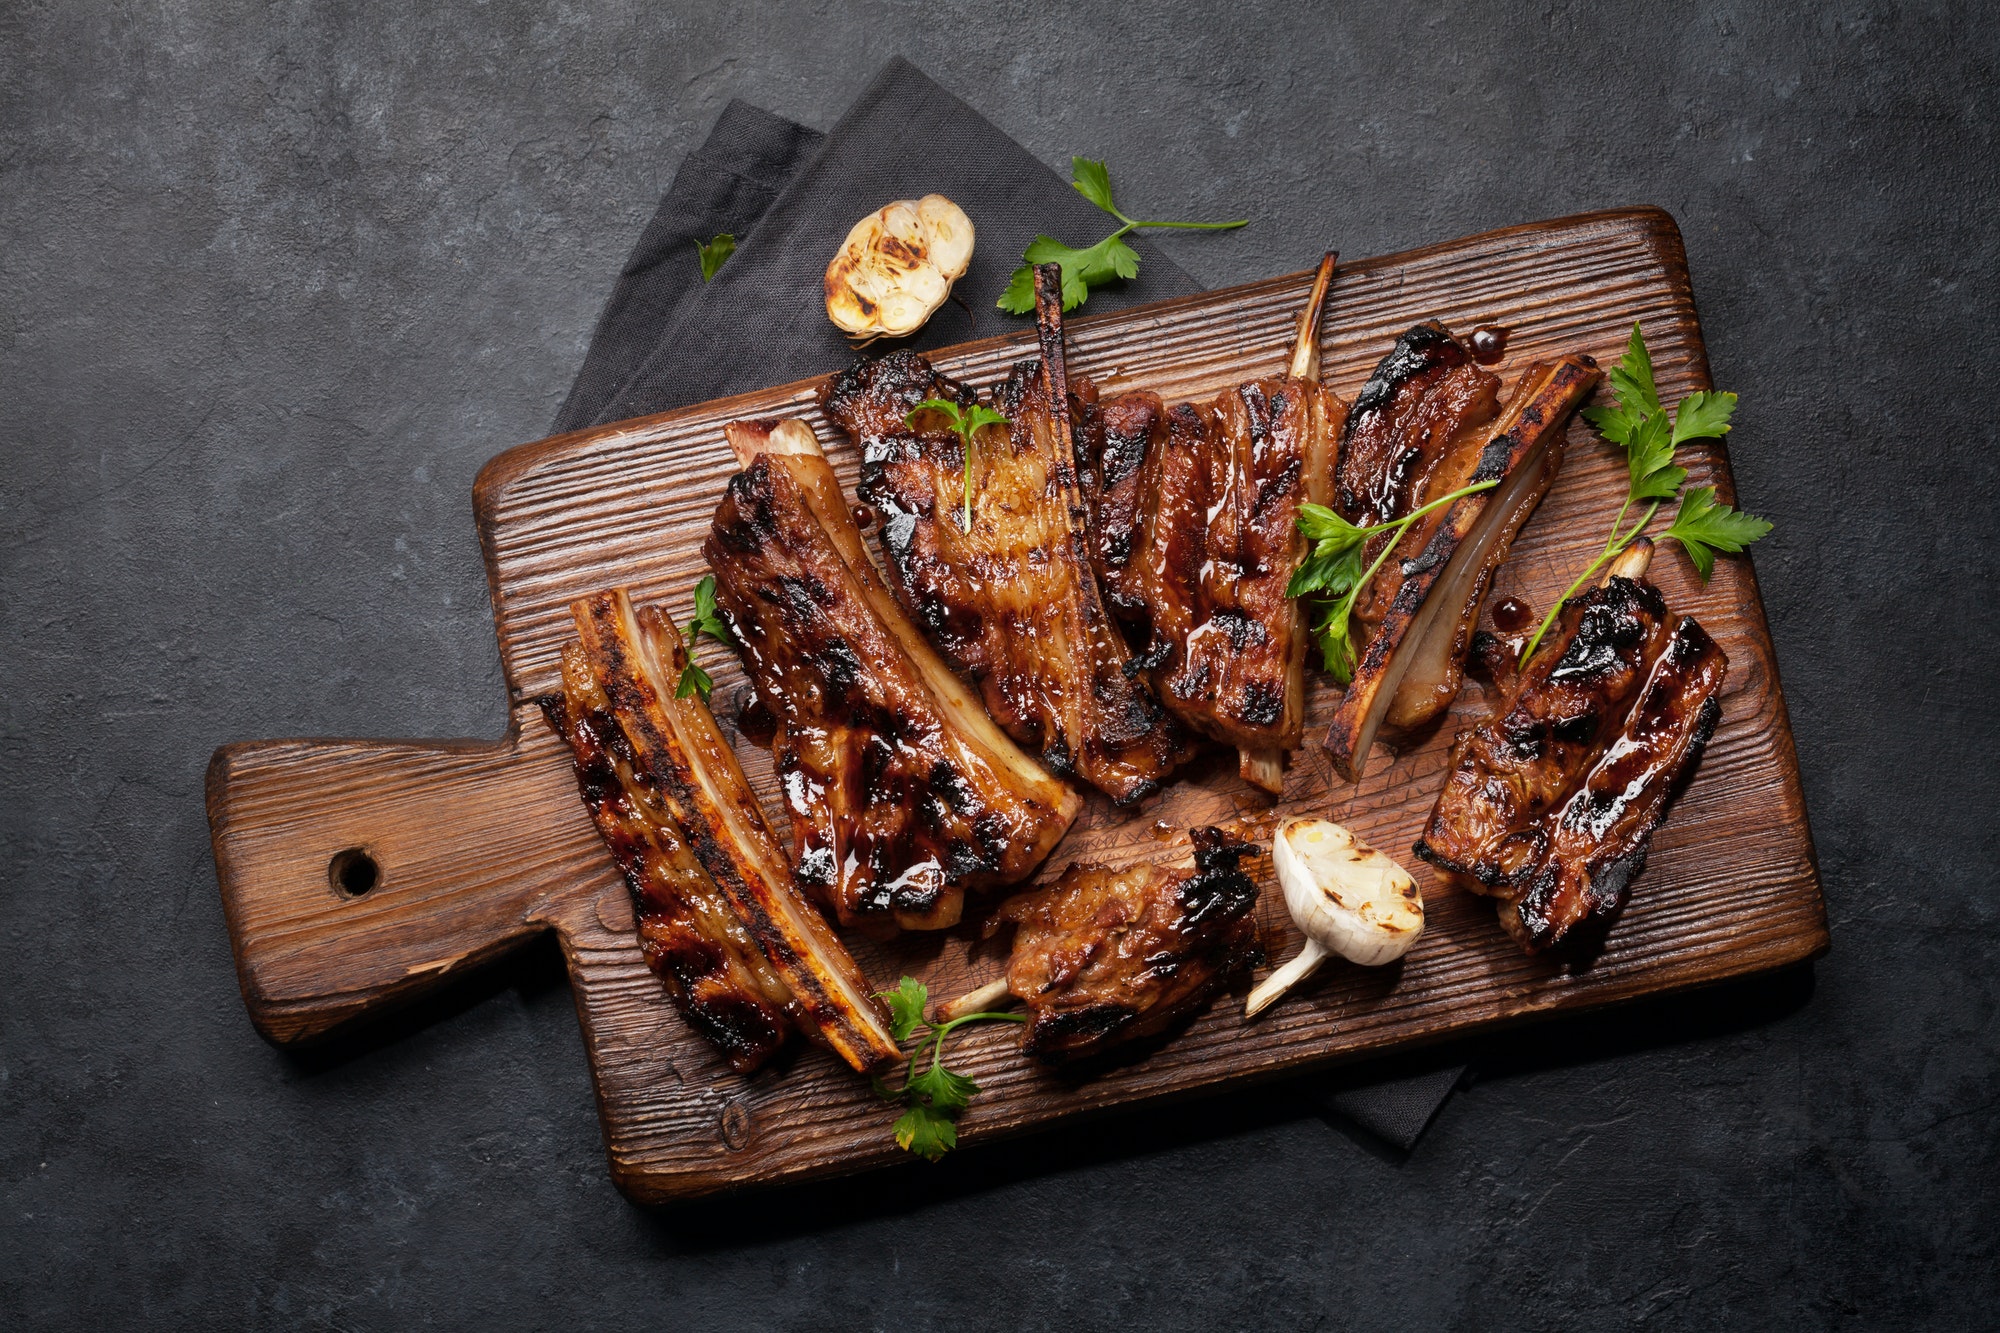 Barbecue beef ribs with bbq sauce sliced